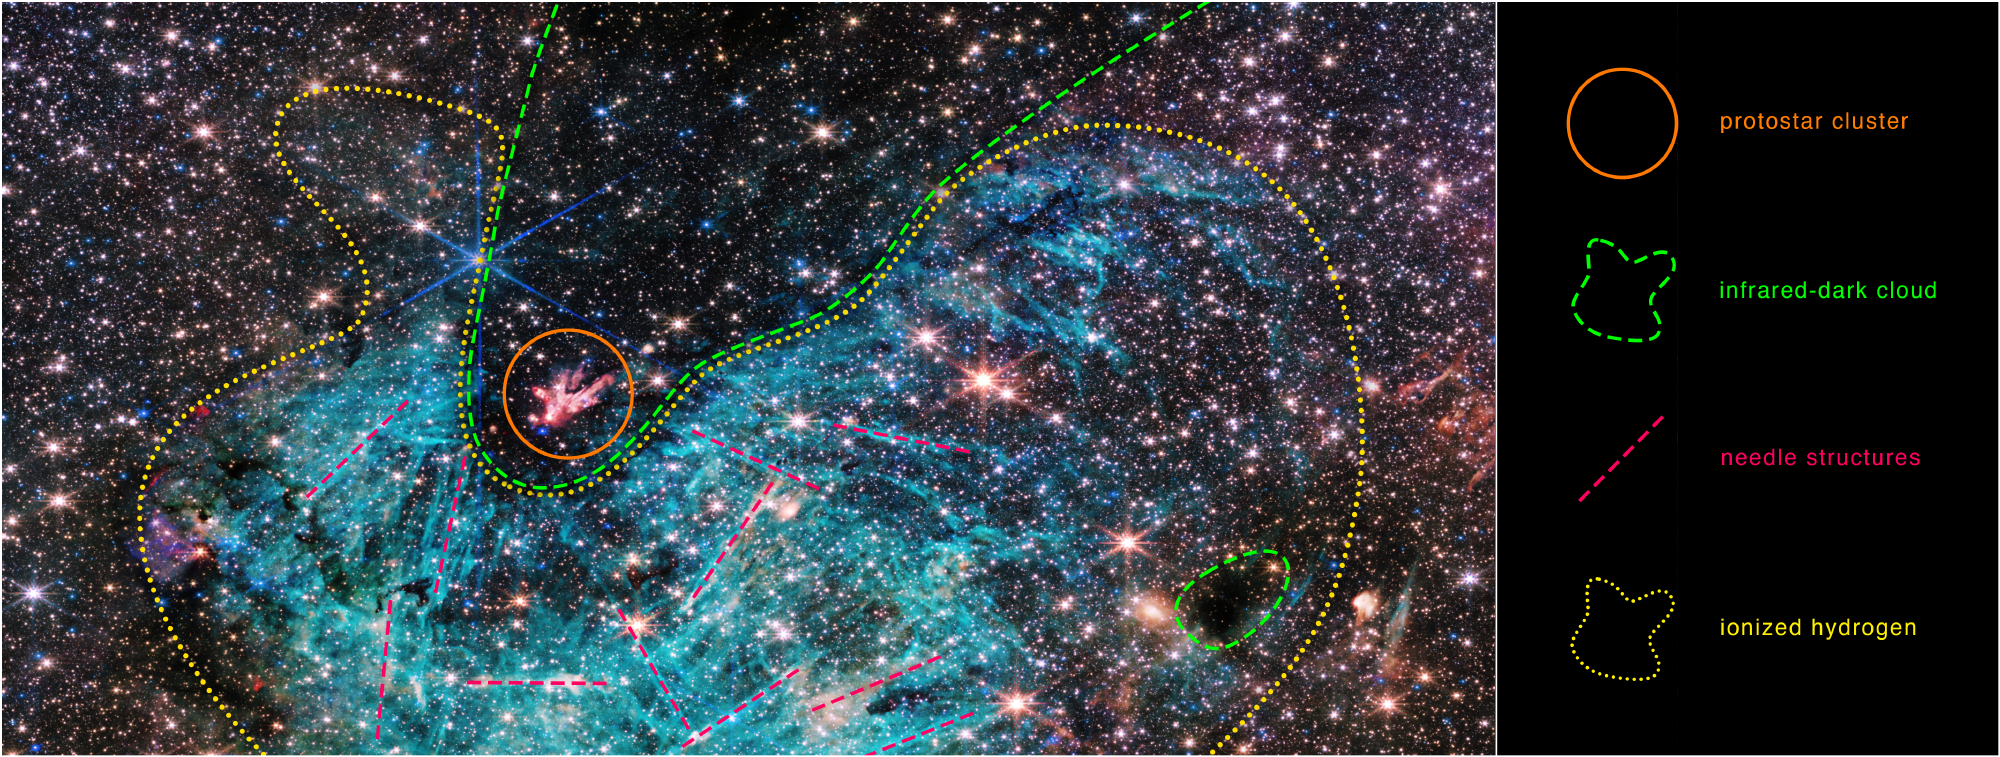 Approximate outlines help to define the features in the Sagittarius C (Sgr C) region. Astronomers are studying data from NASA’s James Webb Space Telescope to understand the relationship between these features, as well as other influences in the chaotic galaxy center.